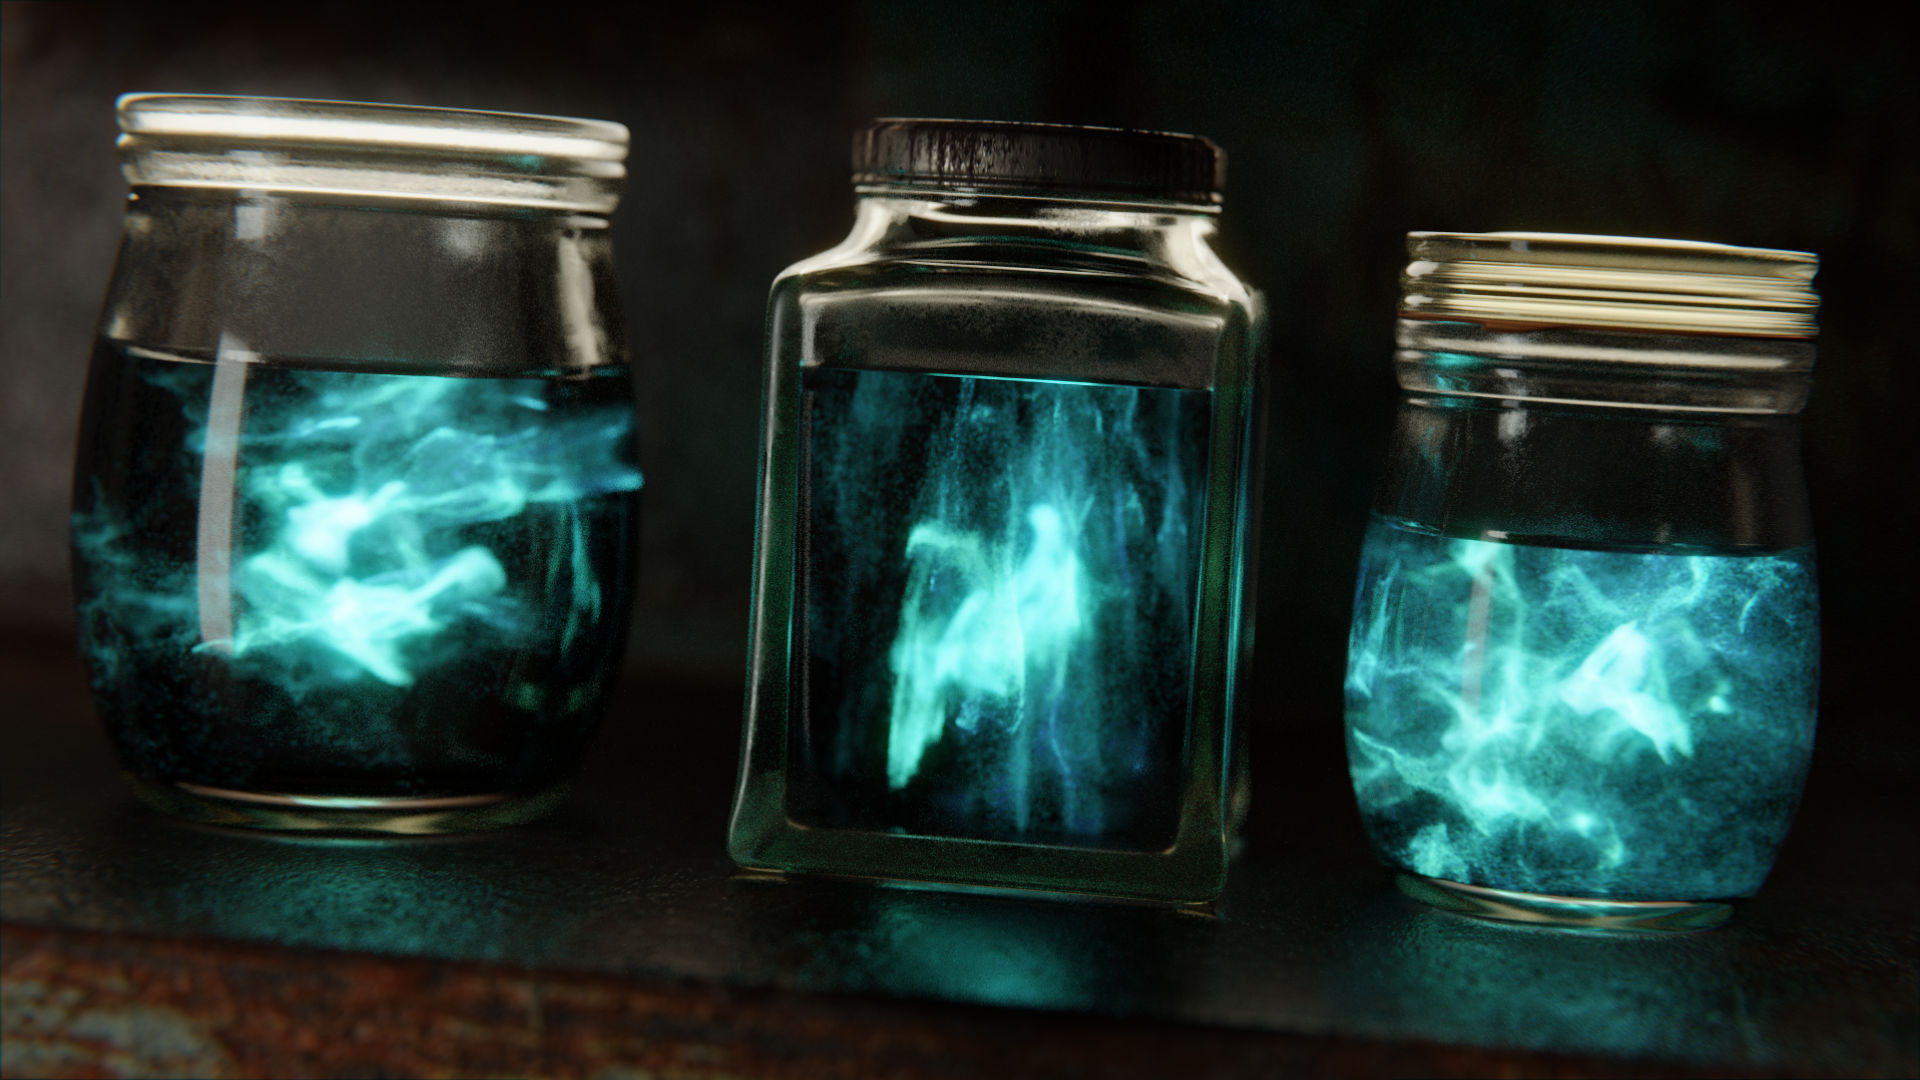 Basic Magical Effect: Ghosts in Jars